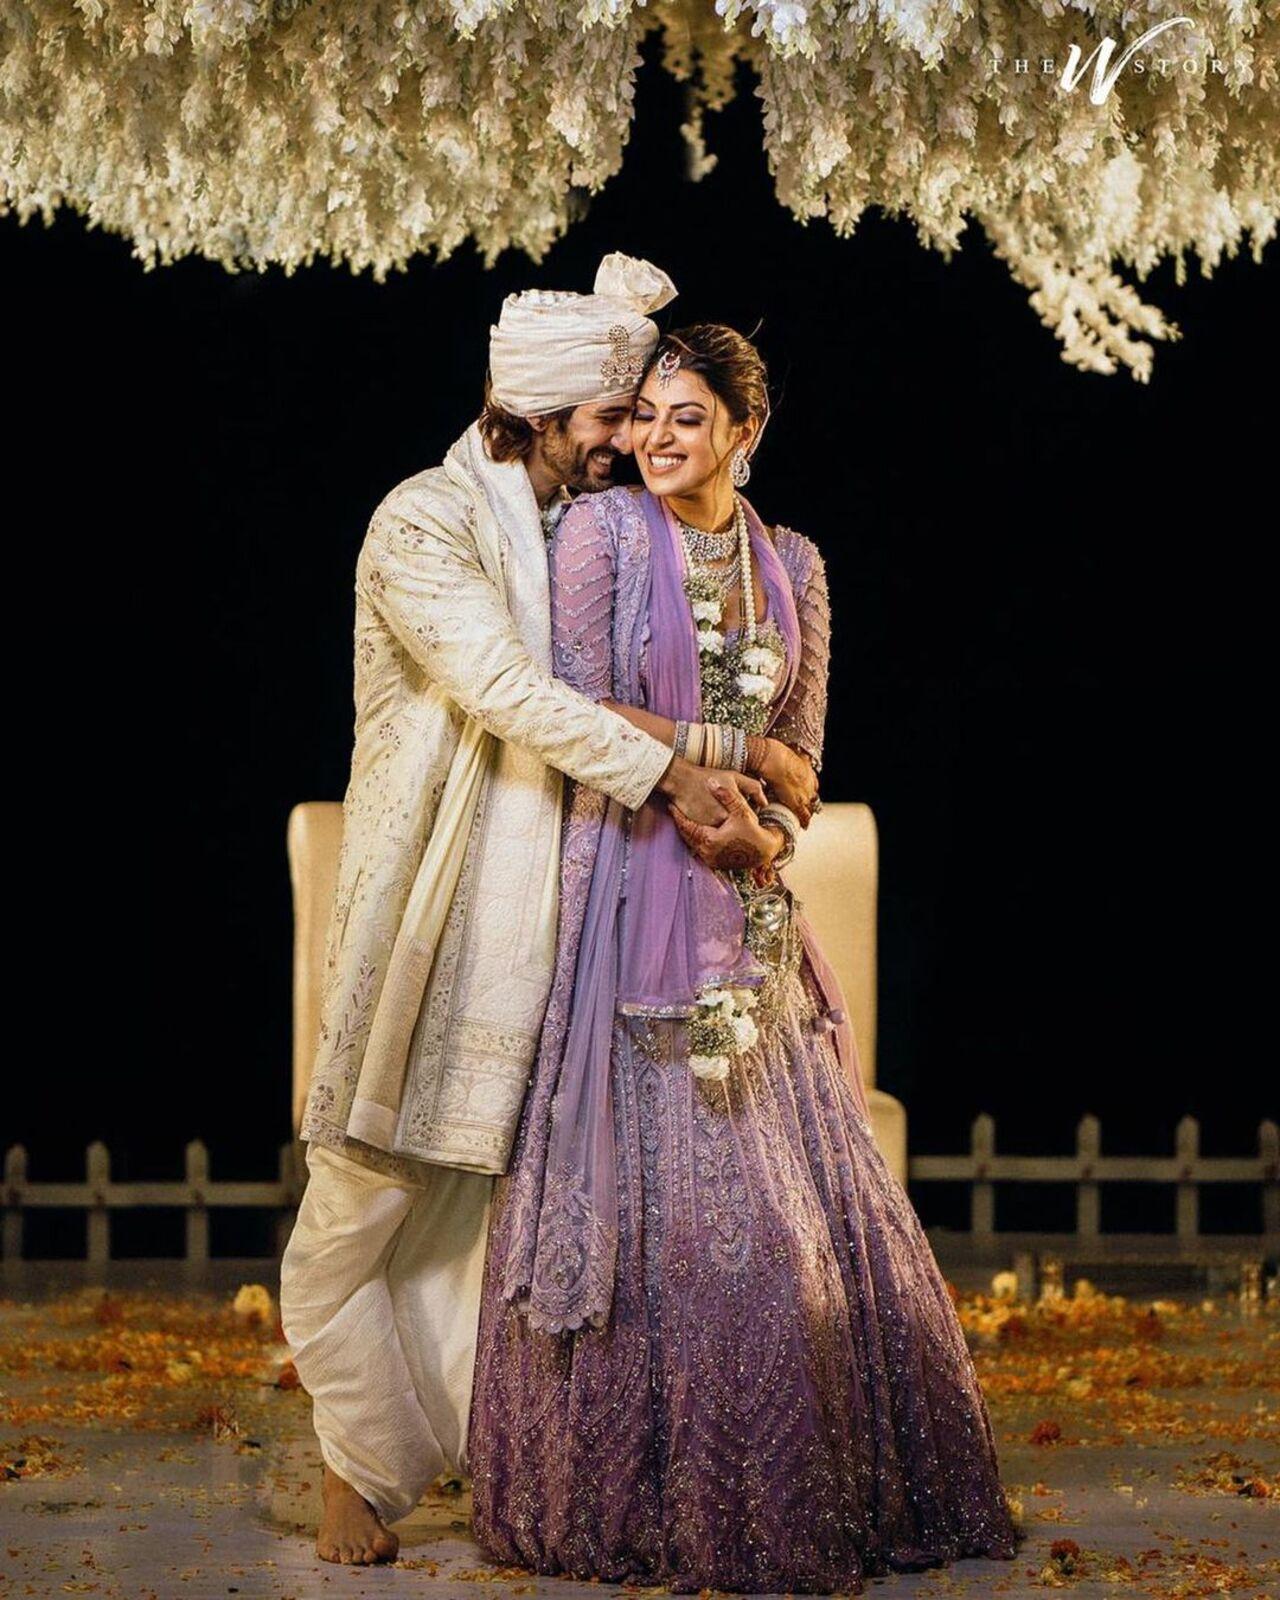 Anushka Ranjan set a new trend by wearing lavender for her wedding Aditya Seal. The designer of the outfit was Mohini Chabria